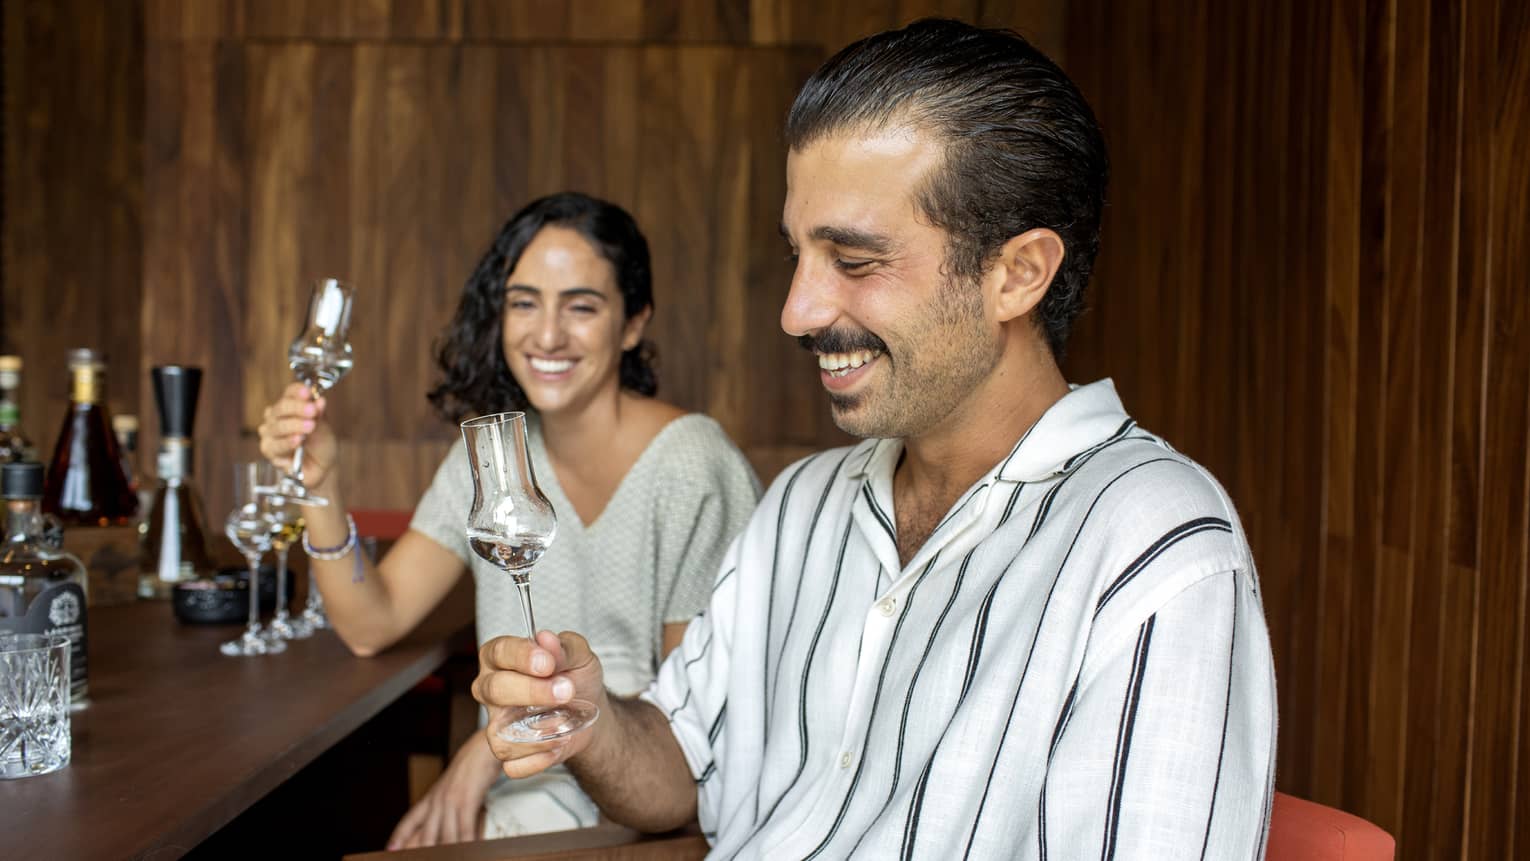 Guests smile while holding grappa glasses filled with agave spirits at a wood bar counter in a wood-panelled room.